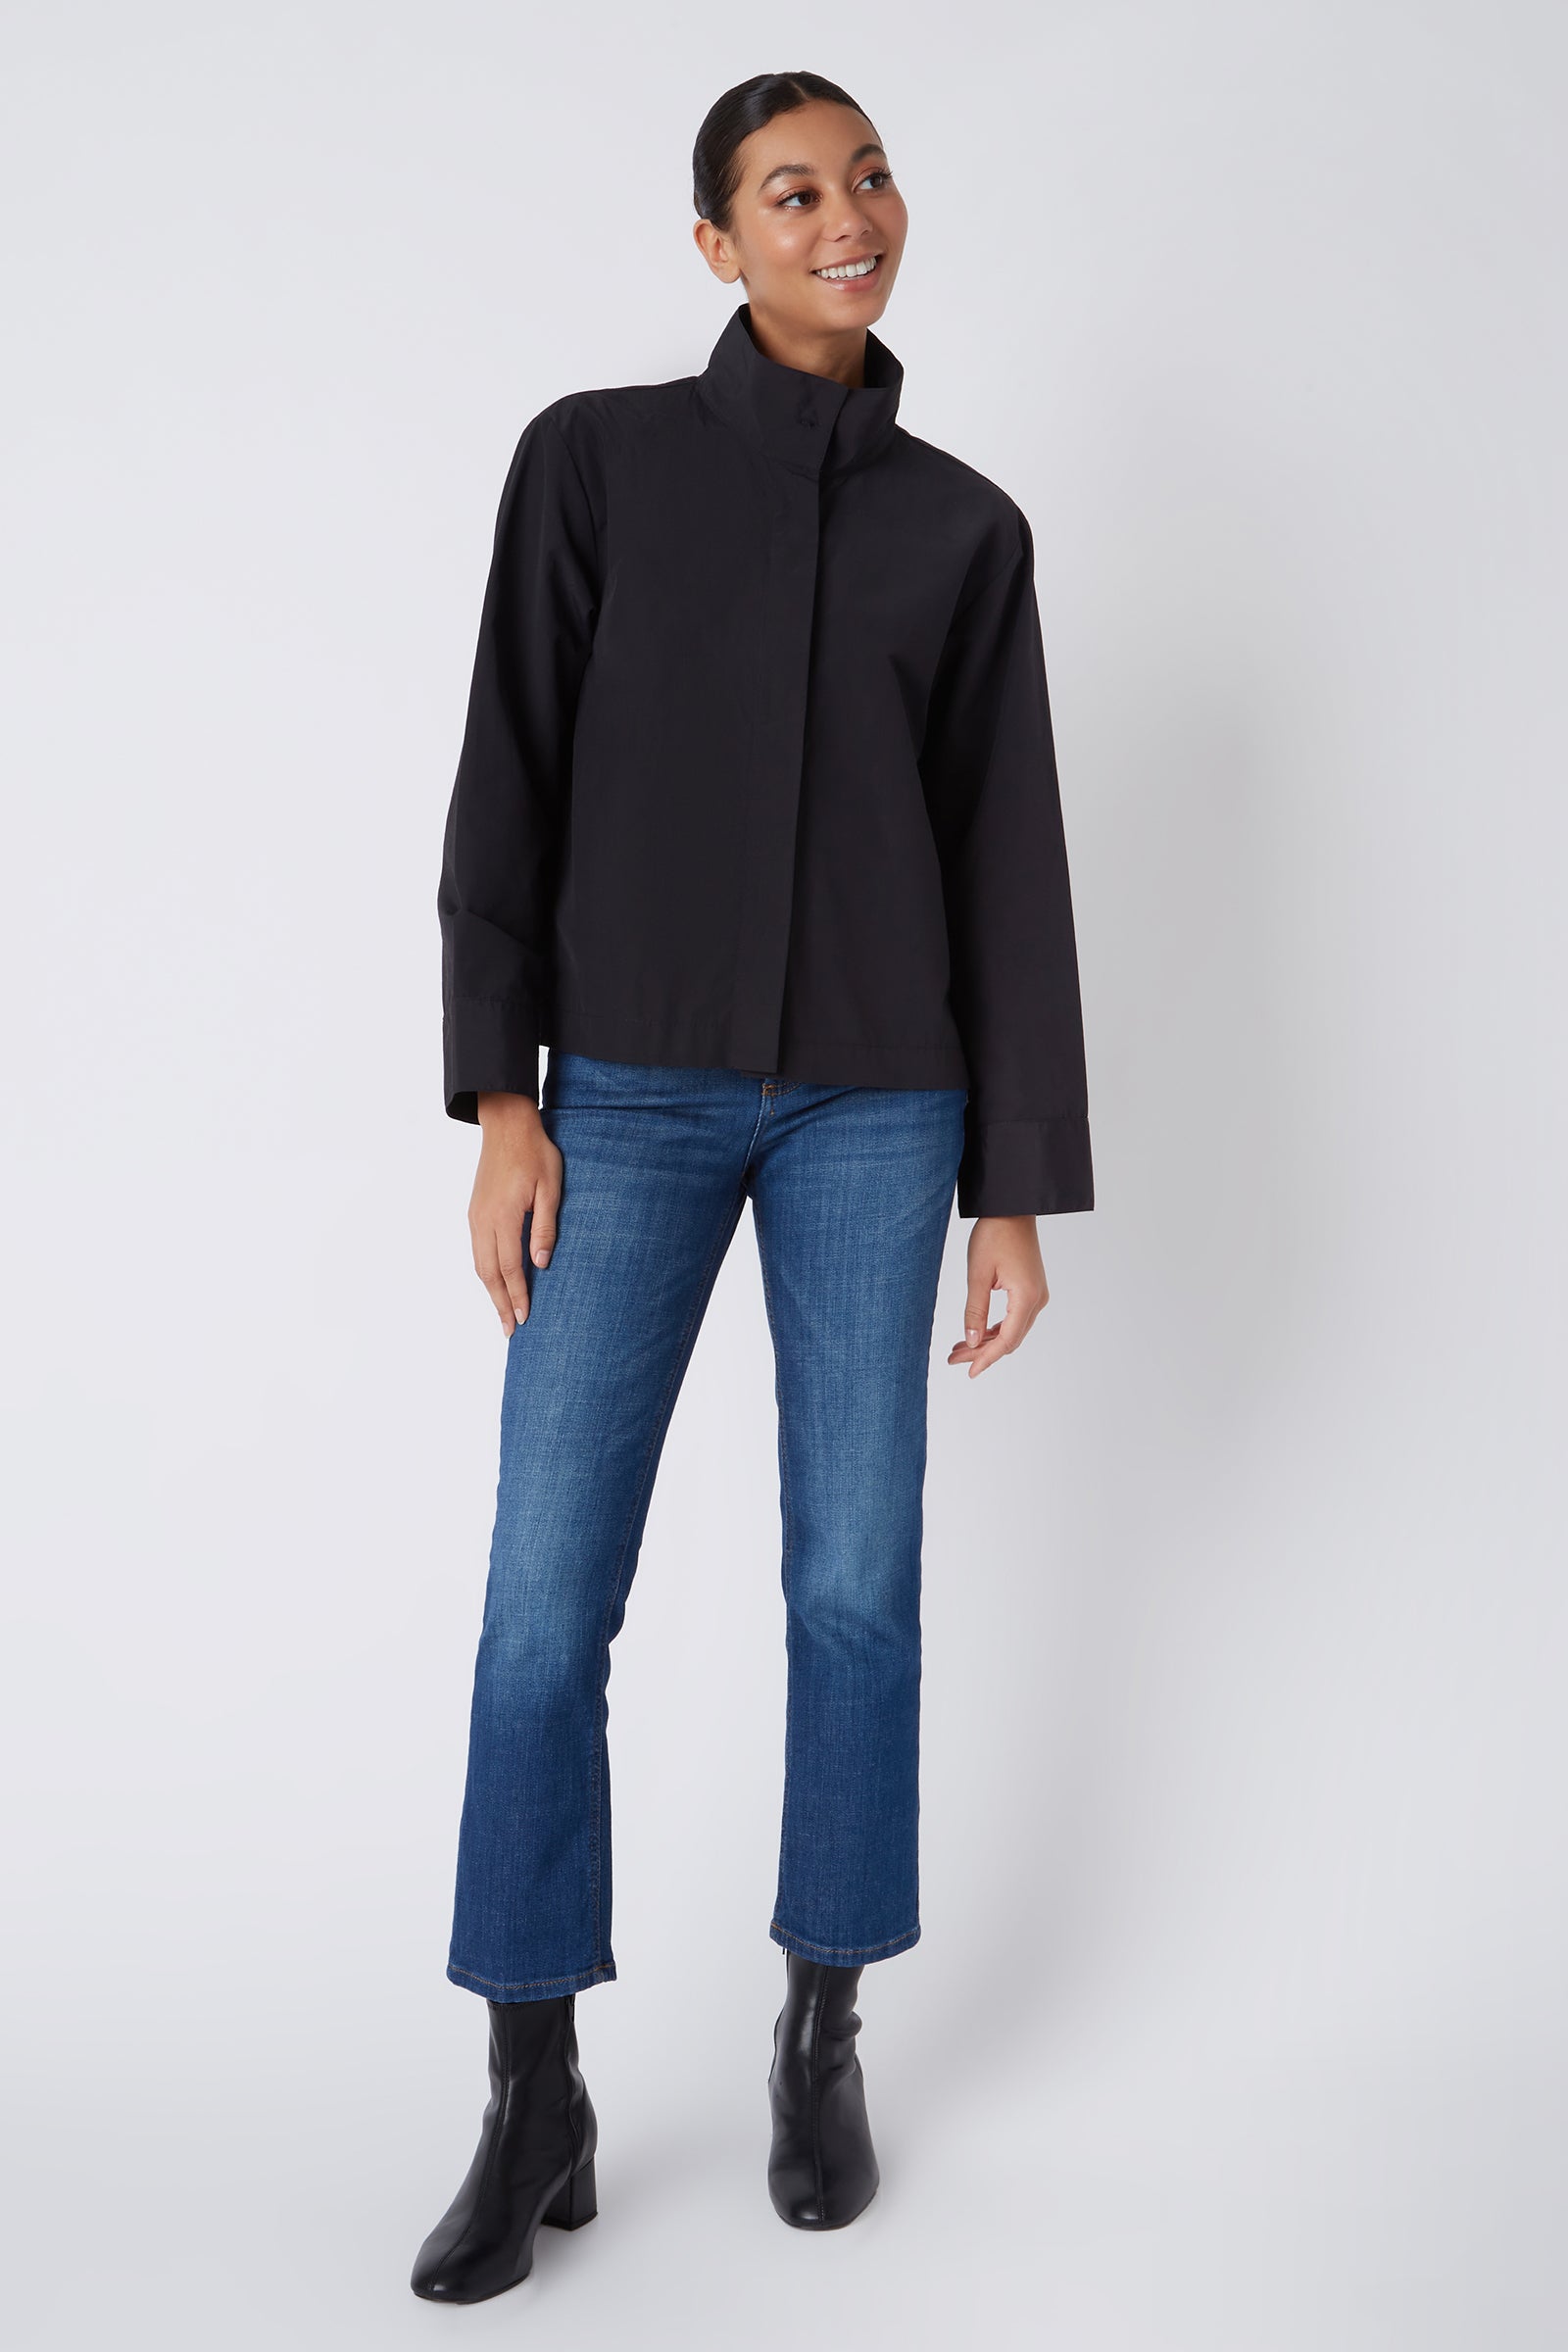 Kal Rieman Peggy Collared Shirt in Black on Model Smiling Full Front View